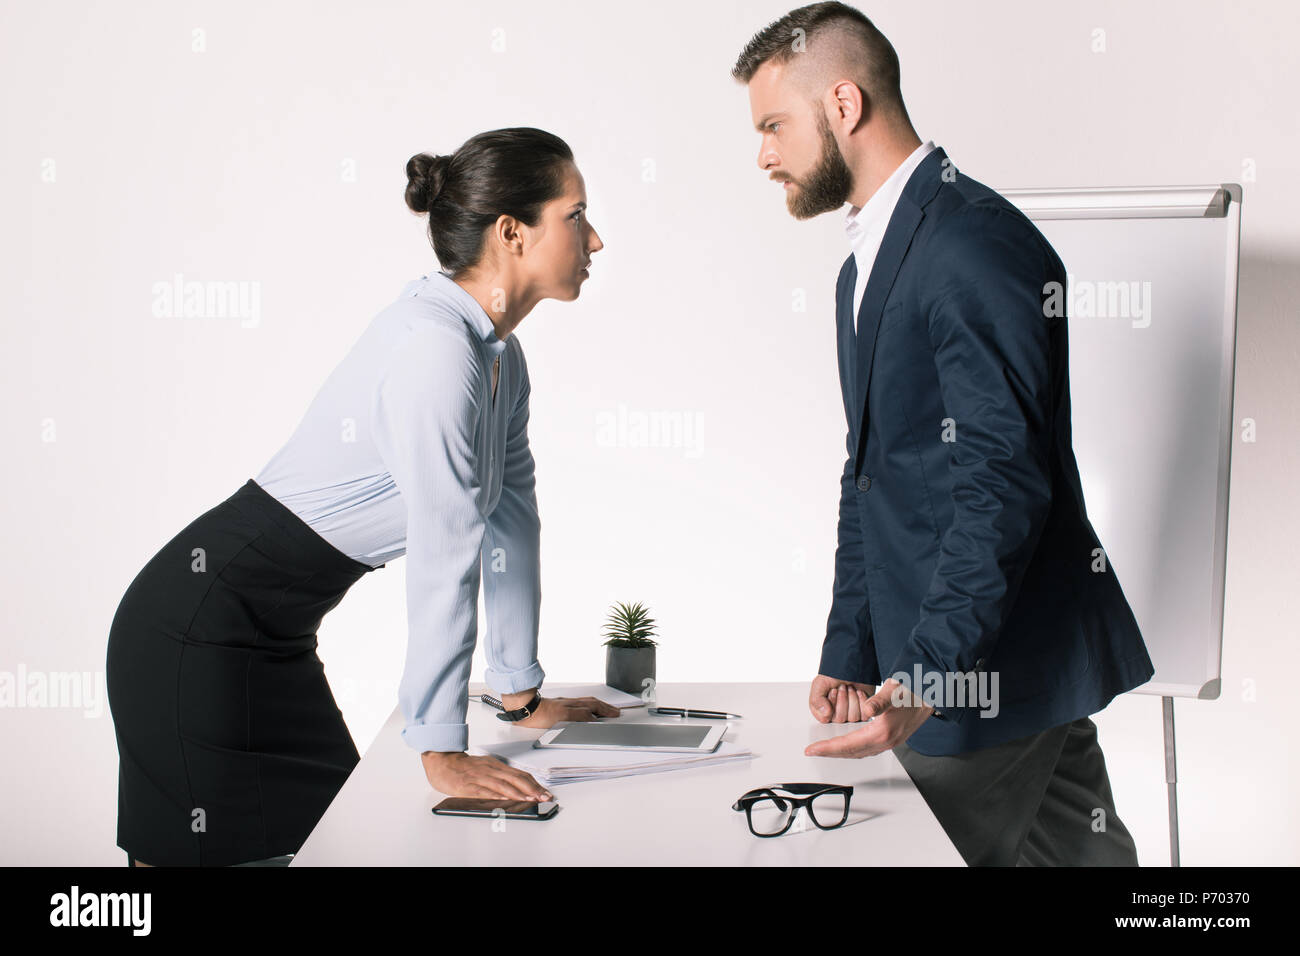 serious business people having disagreement and looking at each other in office Stock Photo